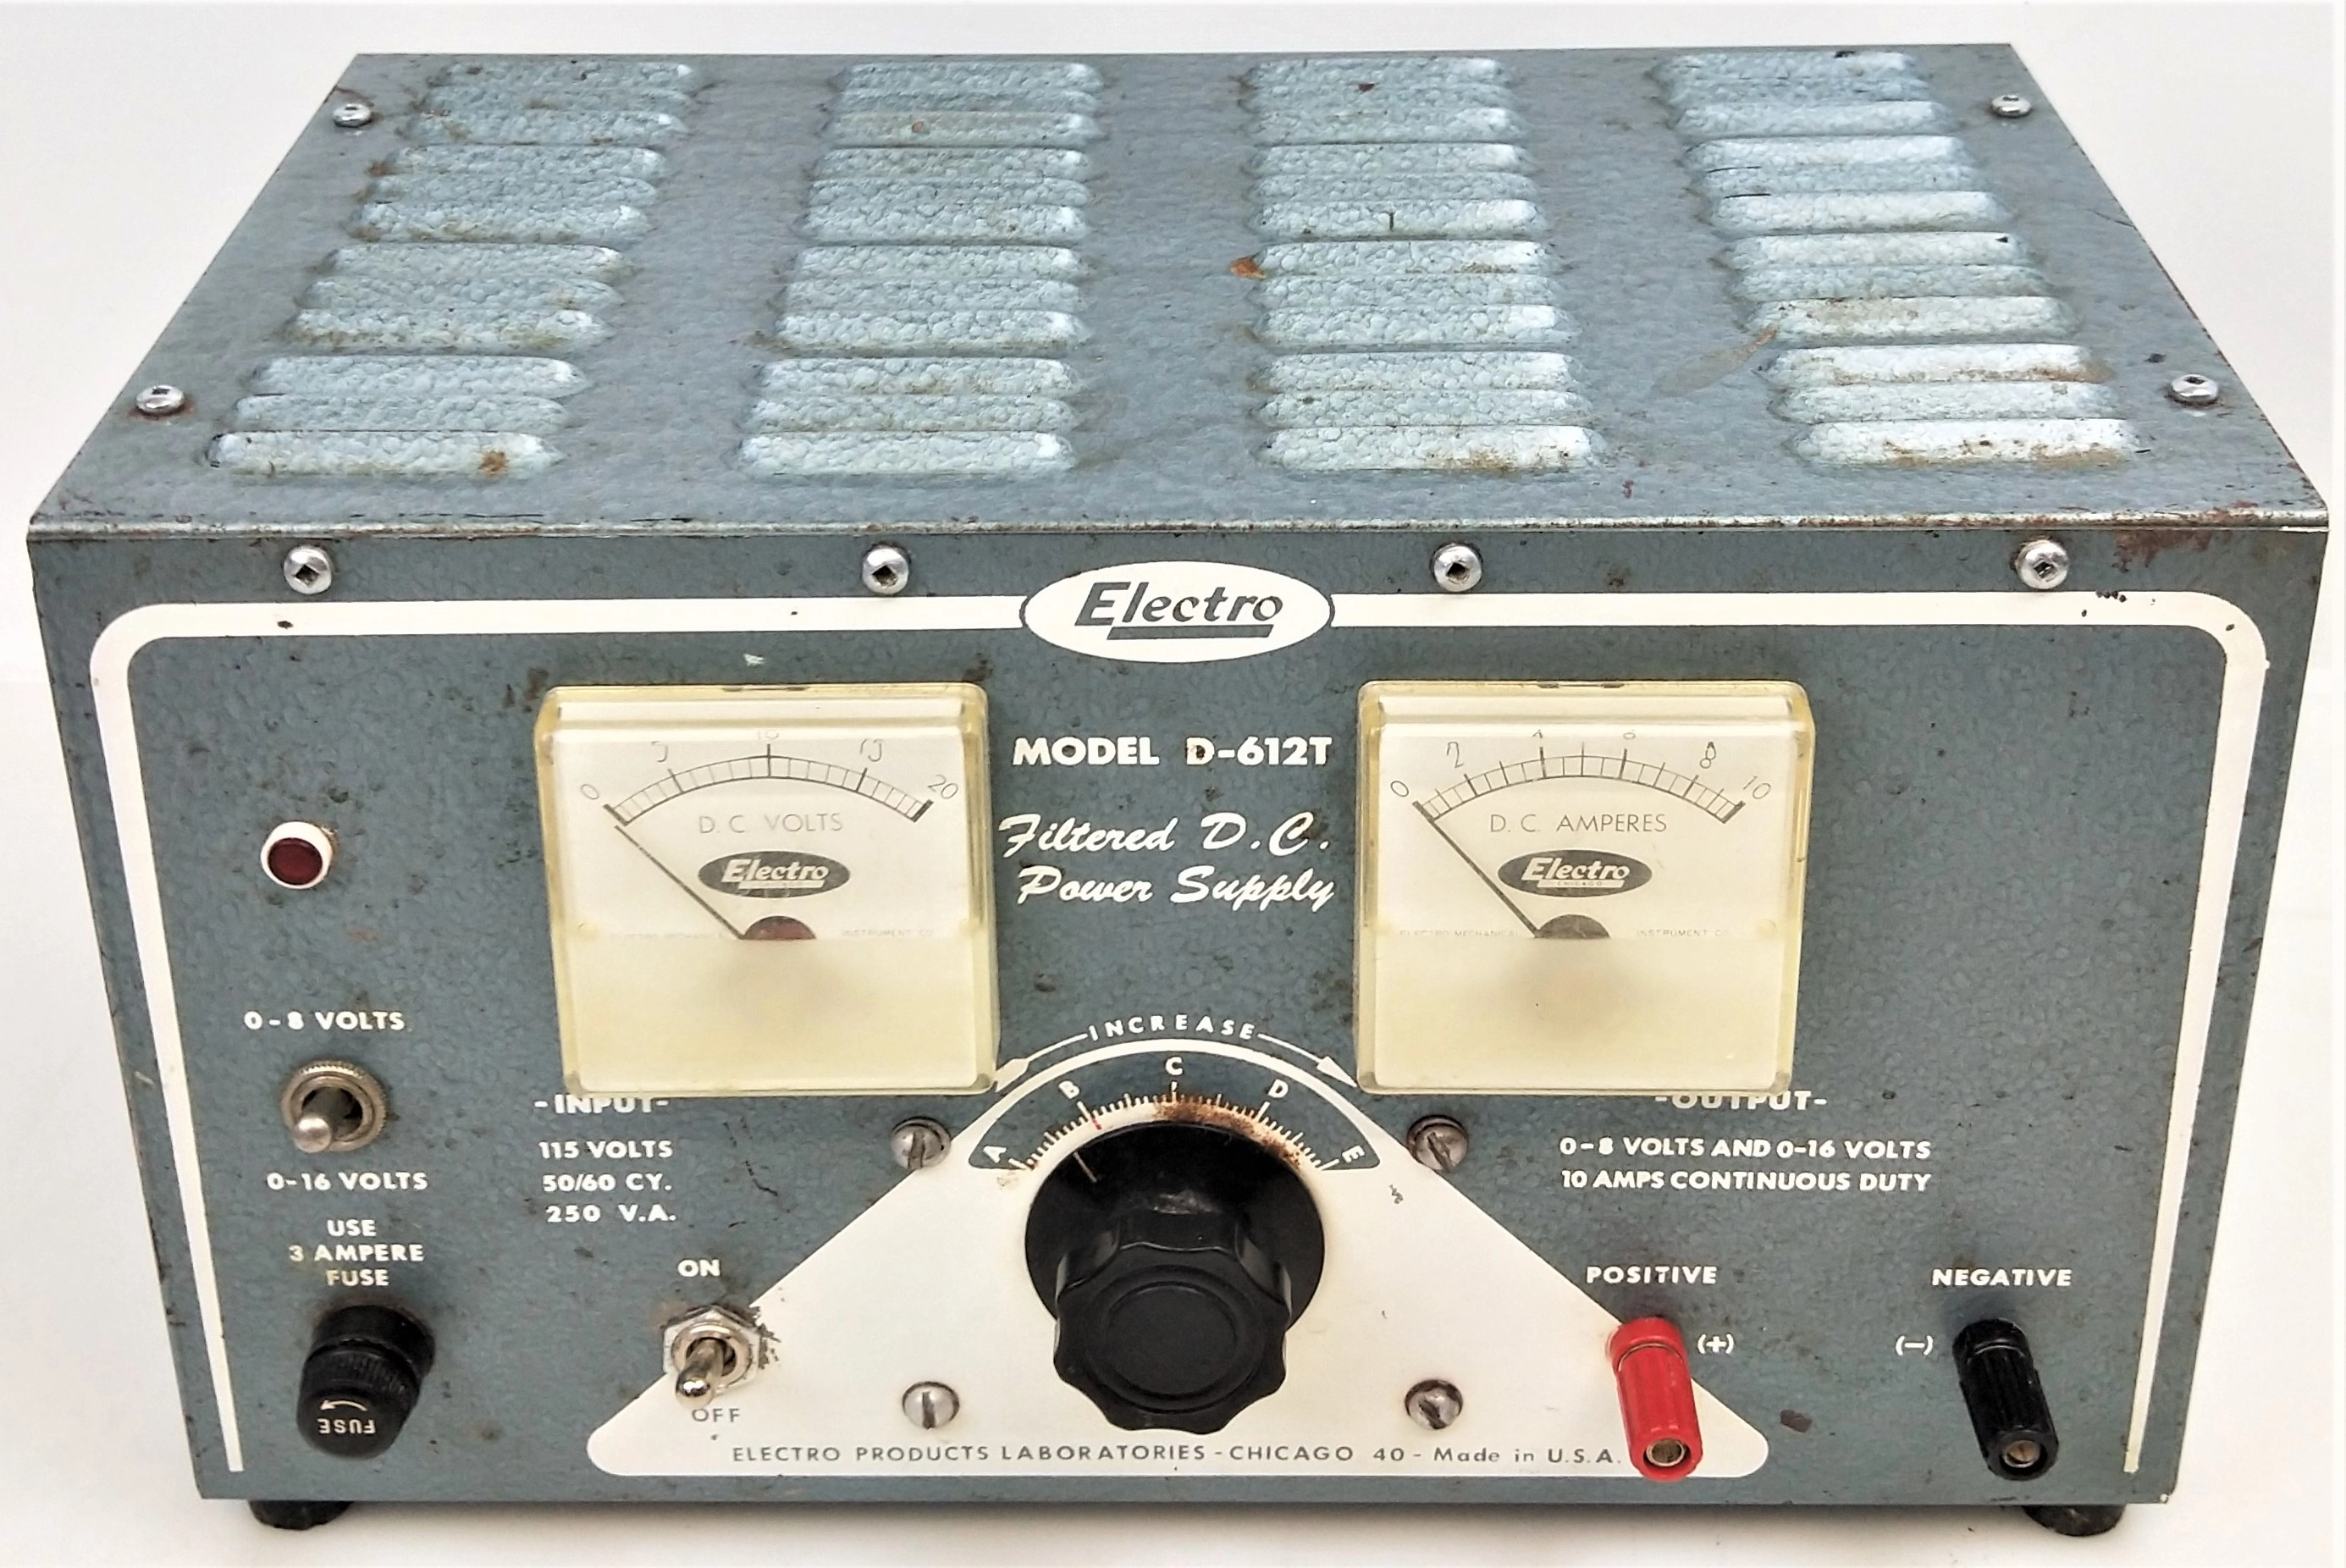 Electro D-612T Filtered DC Power Supply